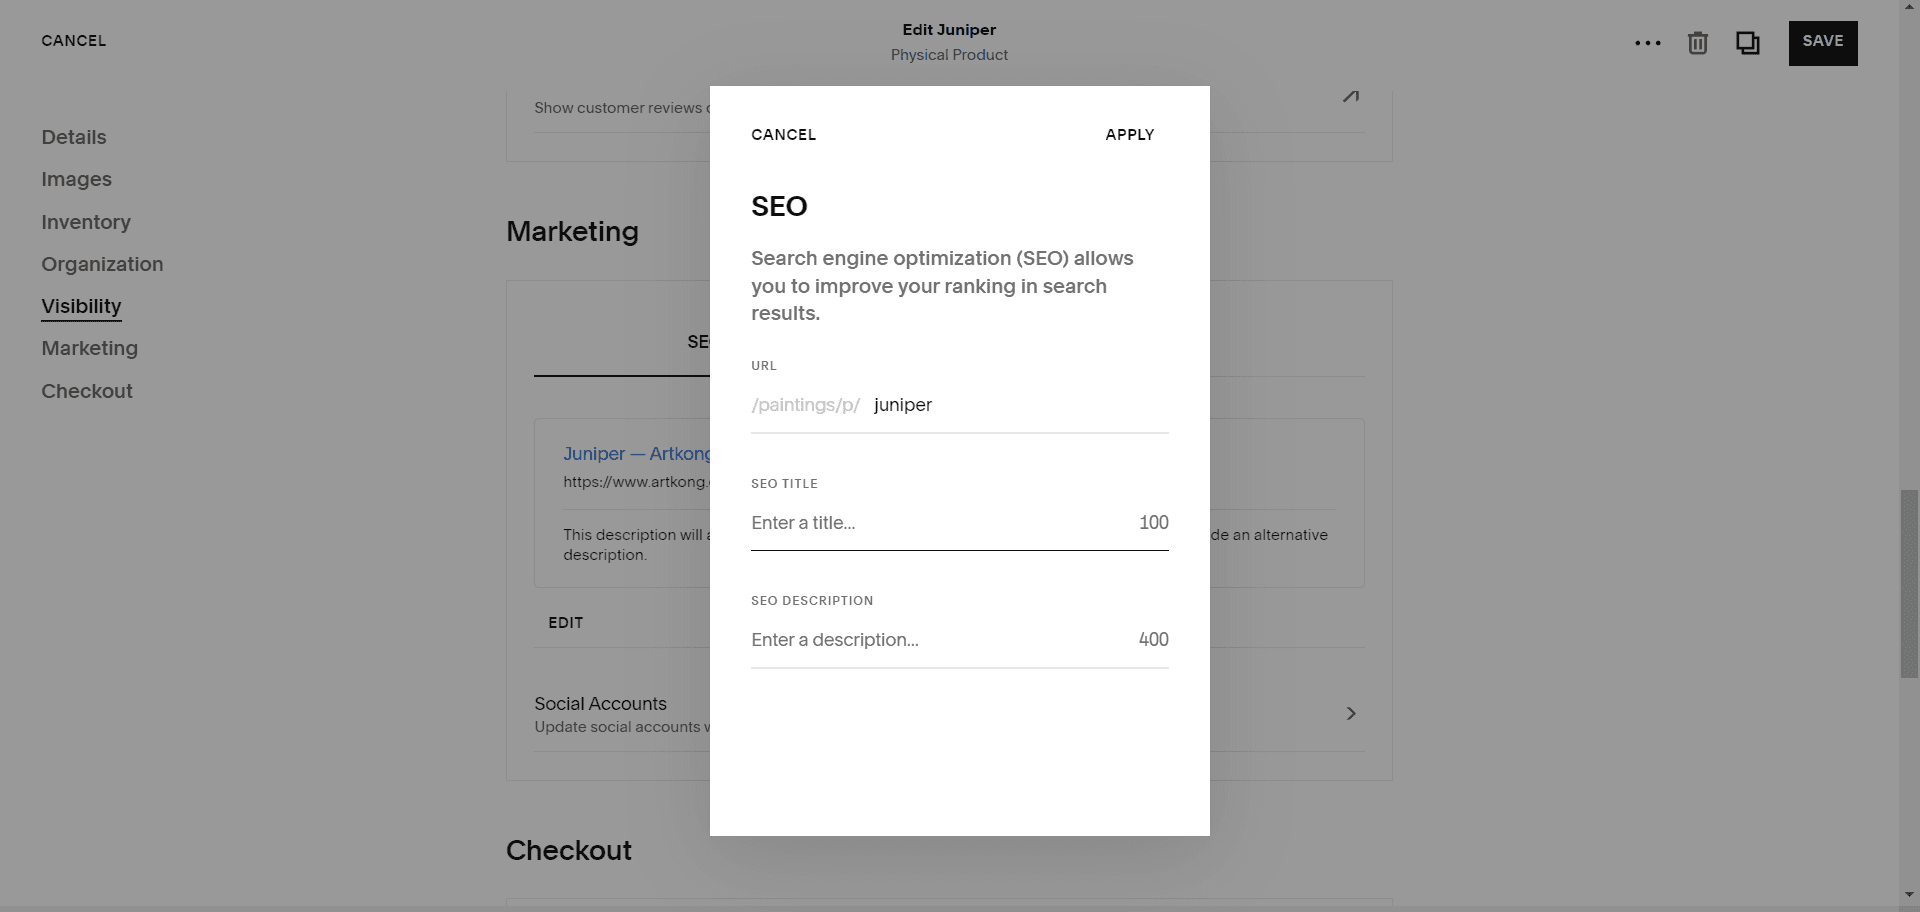 Editing product title and description for SEO